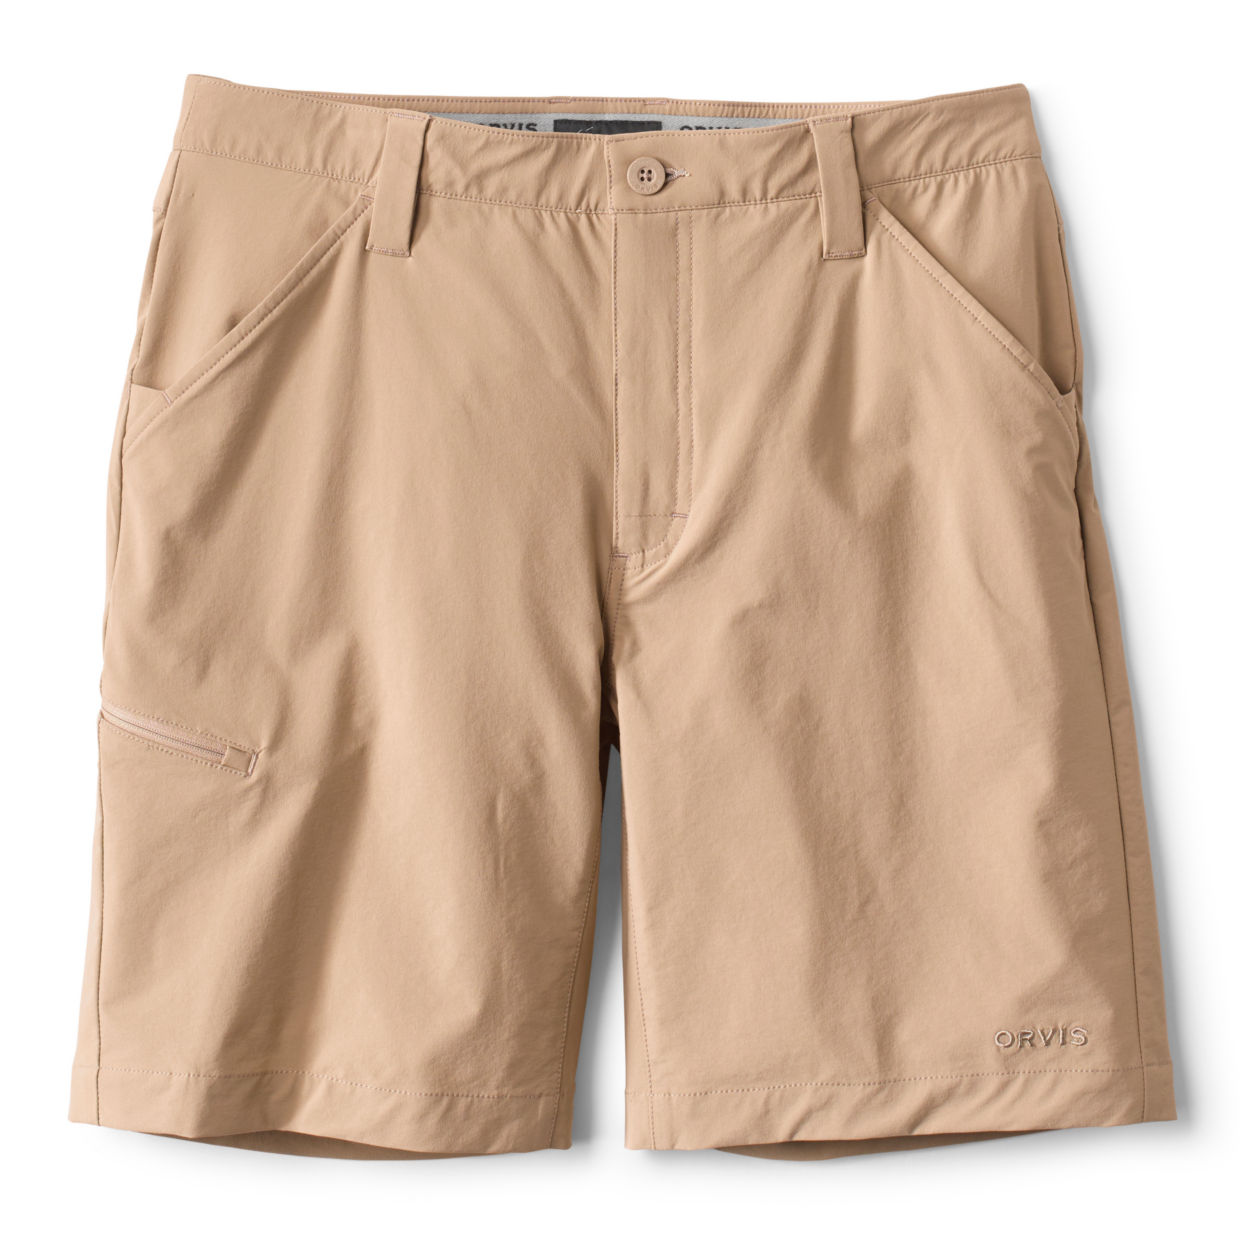 Men's Jackson Recycled Nylon Quick-Dry Shorts Canyon Size 34 Nylon/Recycled Materials Orvis